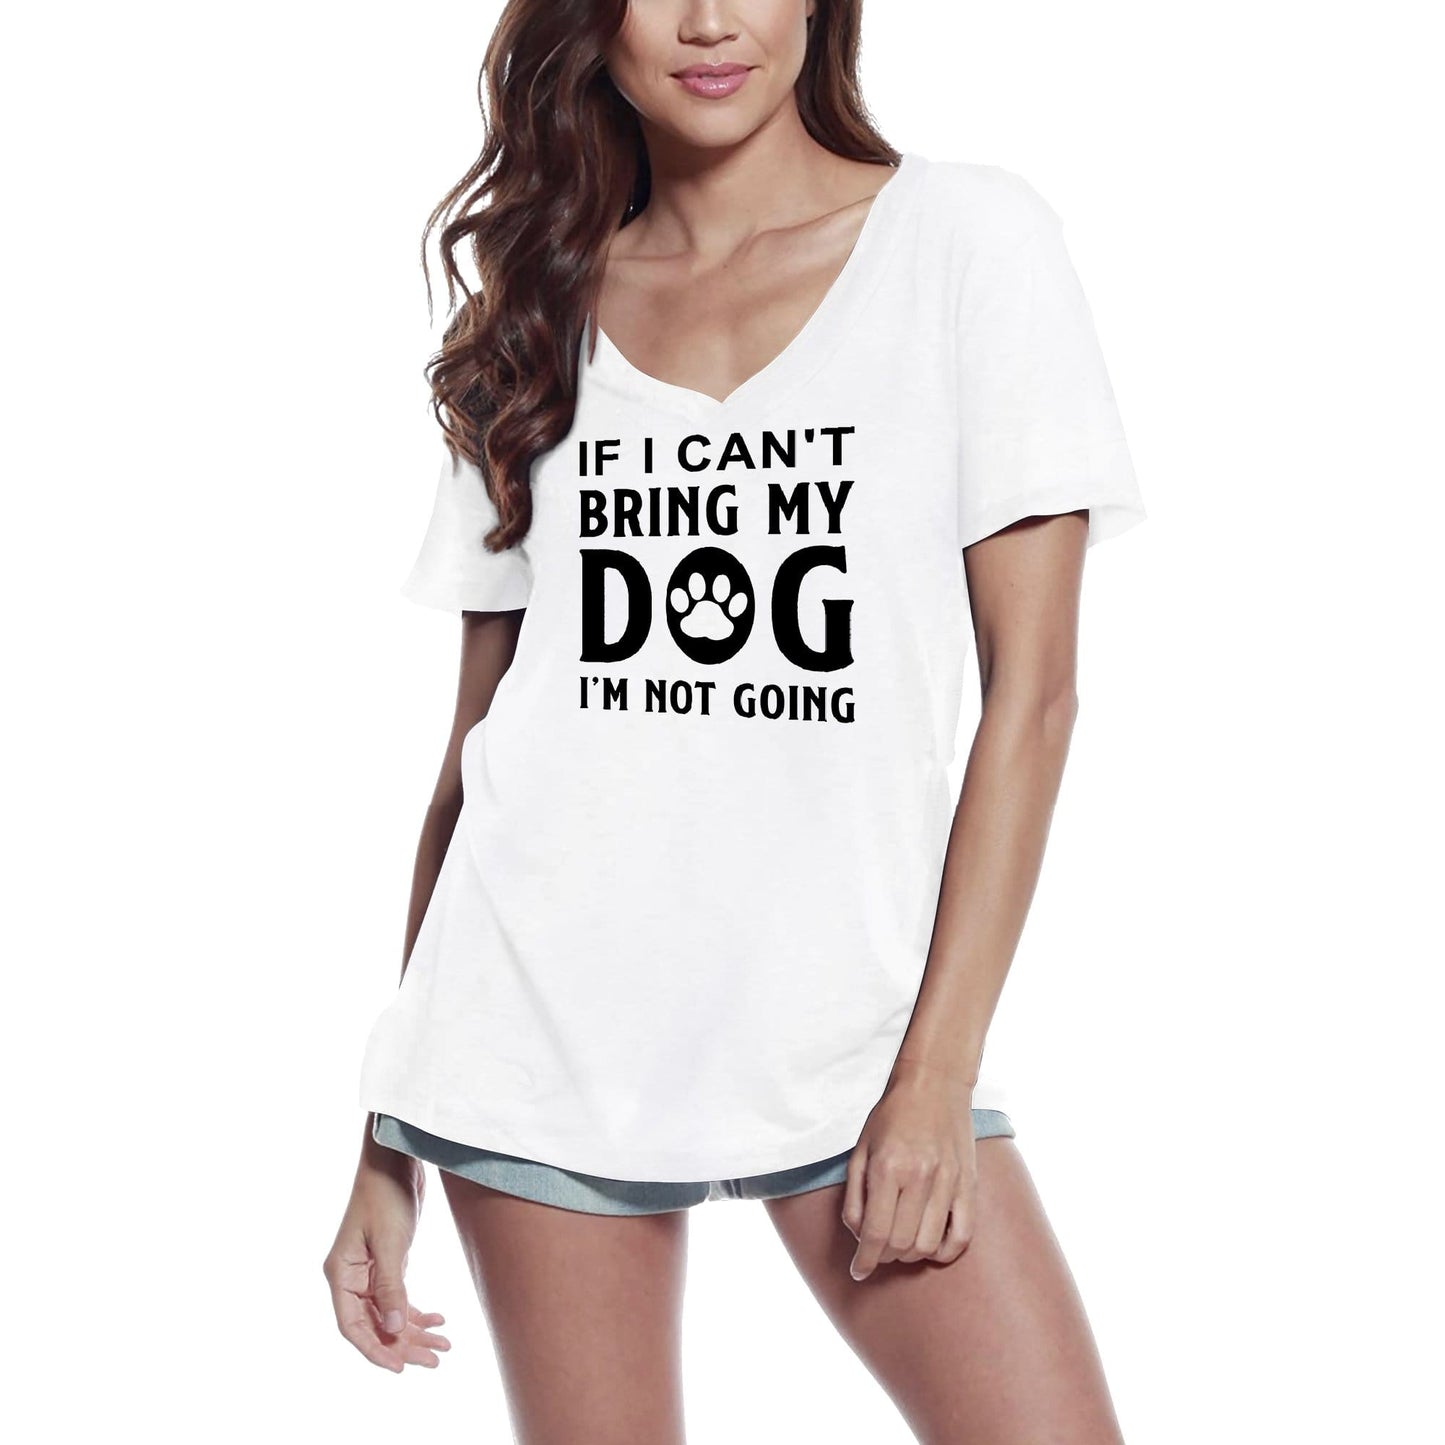 ULTRABASIC Women's T-Shirt If I Can't Bring My Dog I'm Not Going - Funny Short Sleeve Tee Shirt Tops